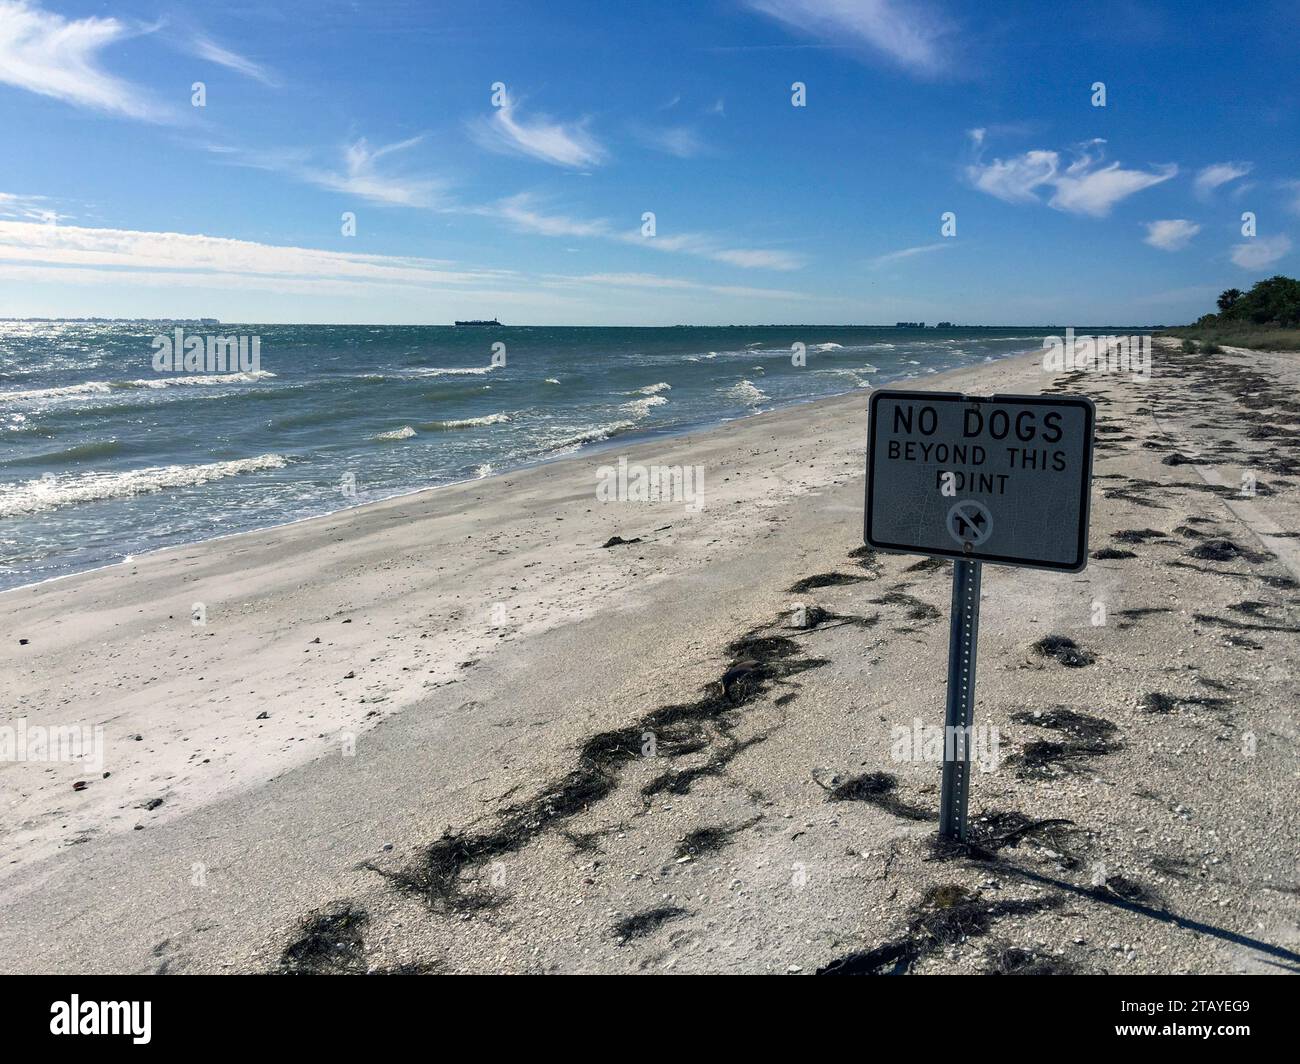 No dogs beyond this point sign on a Florida beach Stock Photo